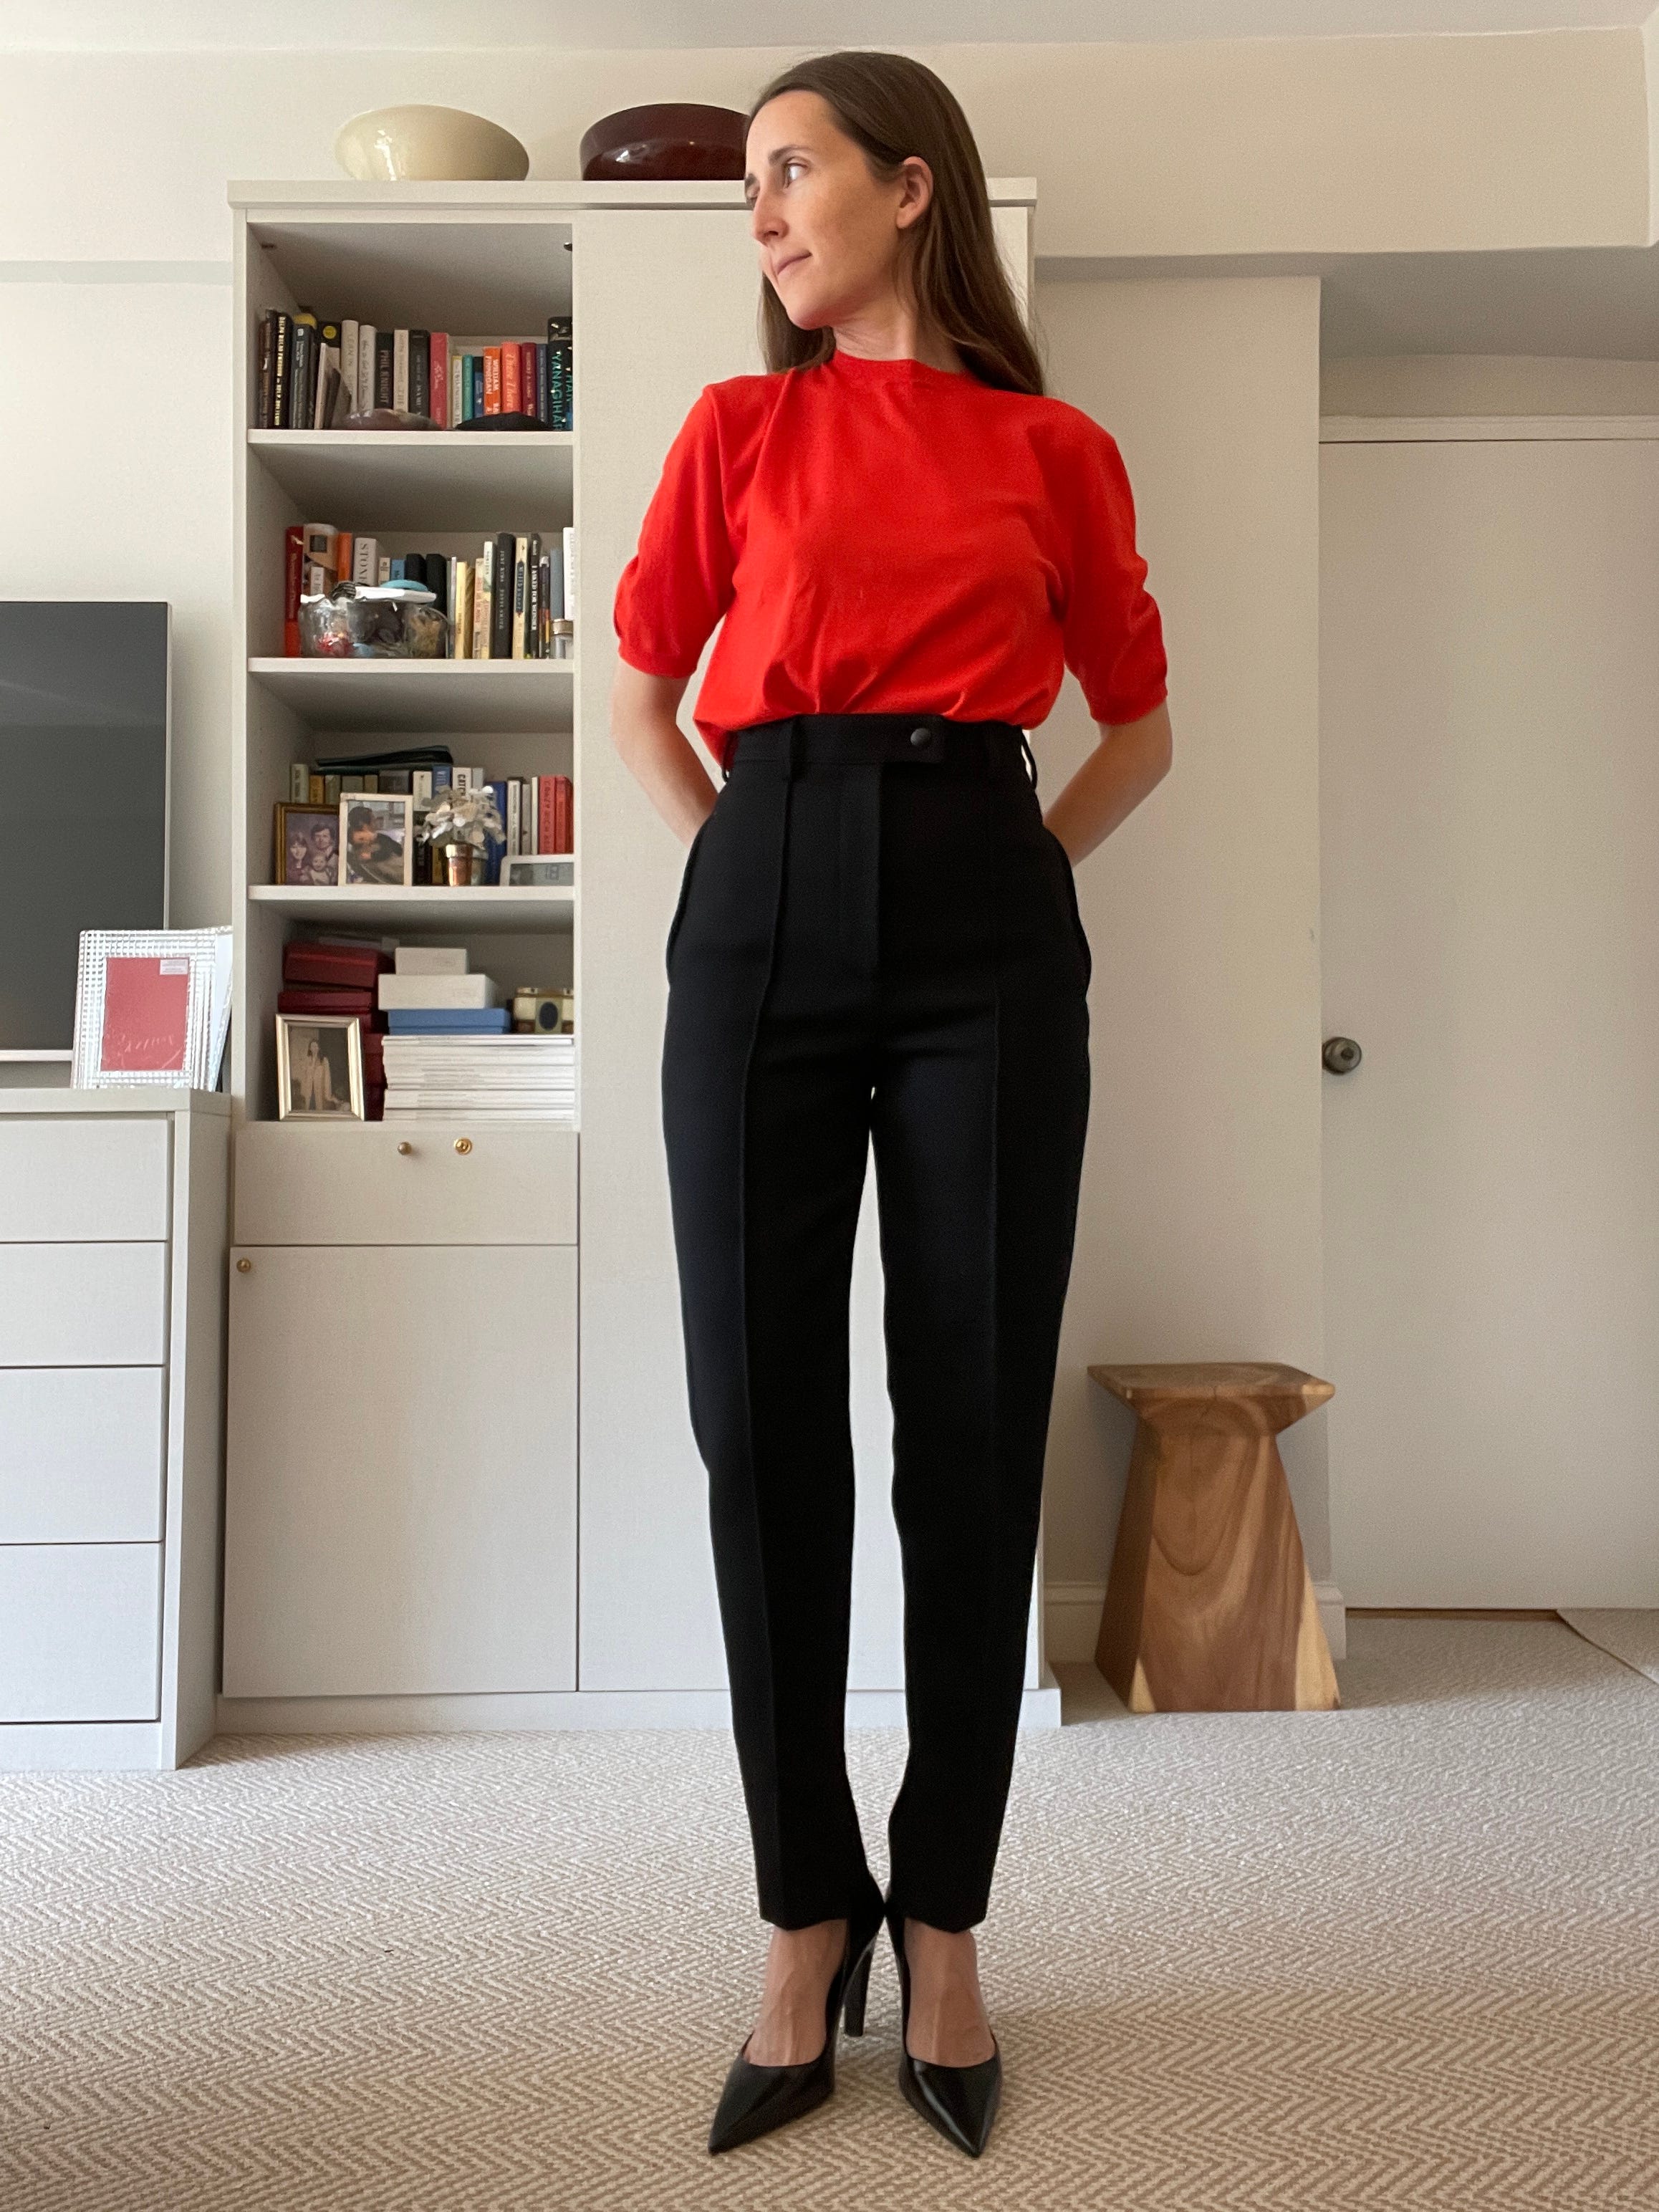 Trouser We Go Red High-Waisted Pants  Work outfit, Work outfits women, Red  high waisted pants